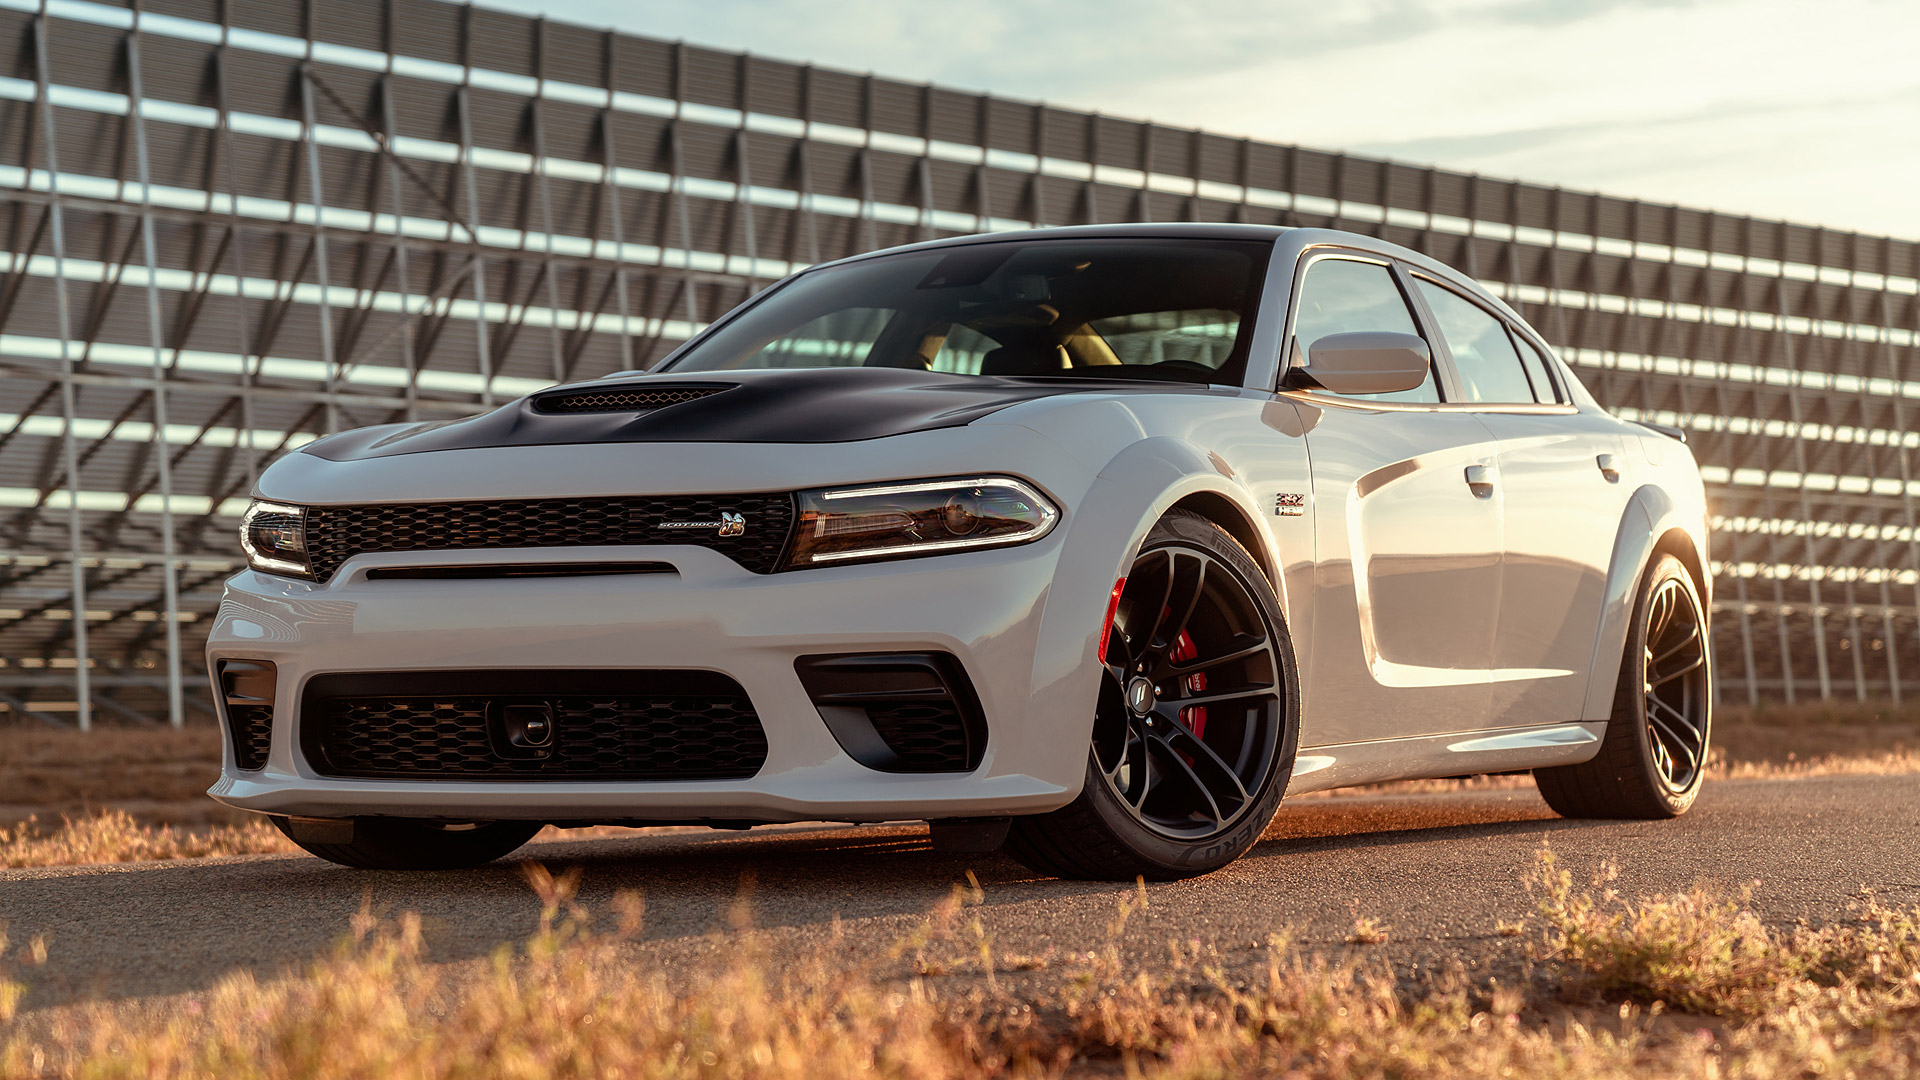  2020 Dodge Charger Scat Pack Widebody Wallpaper.